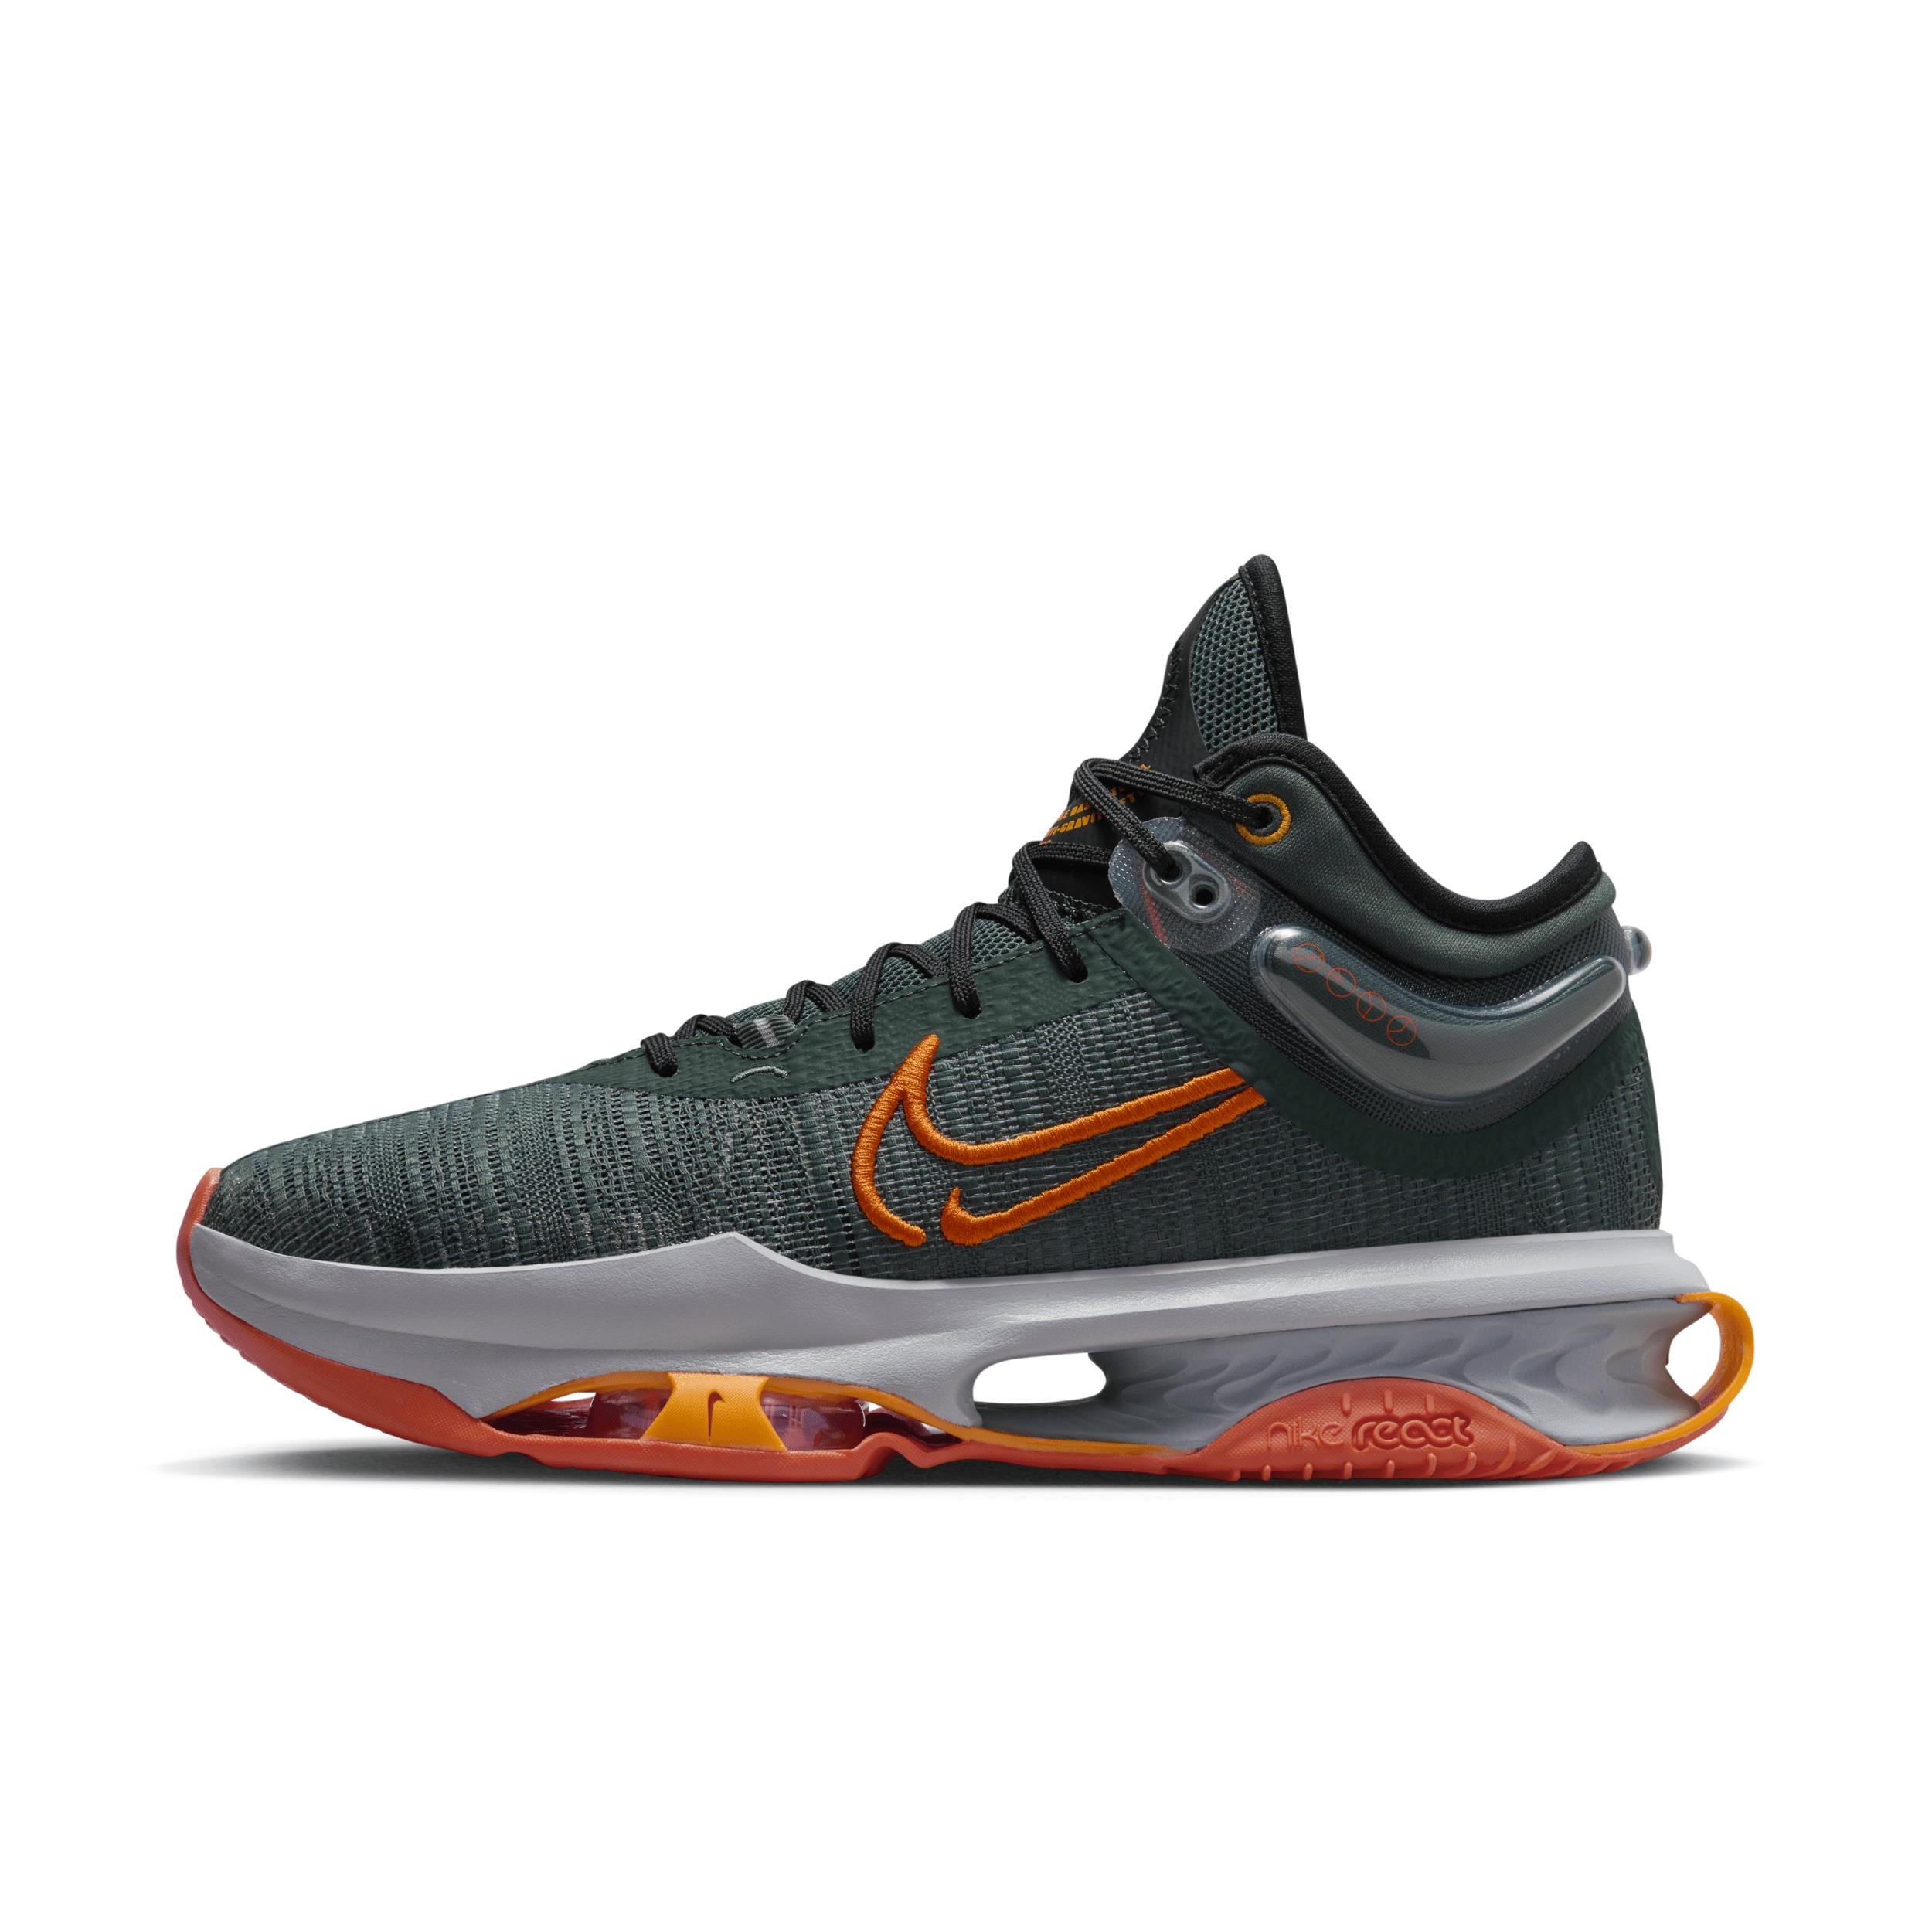 Nike Men's G.T. Jump 2 Basketball Shoes by NIKE